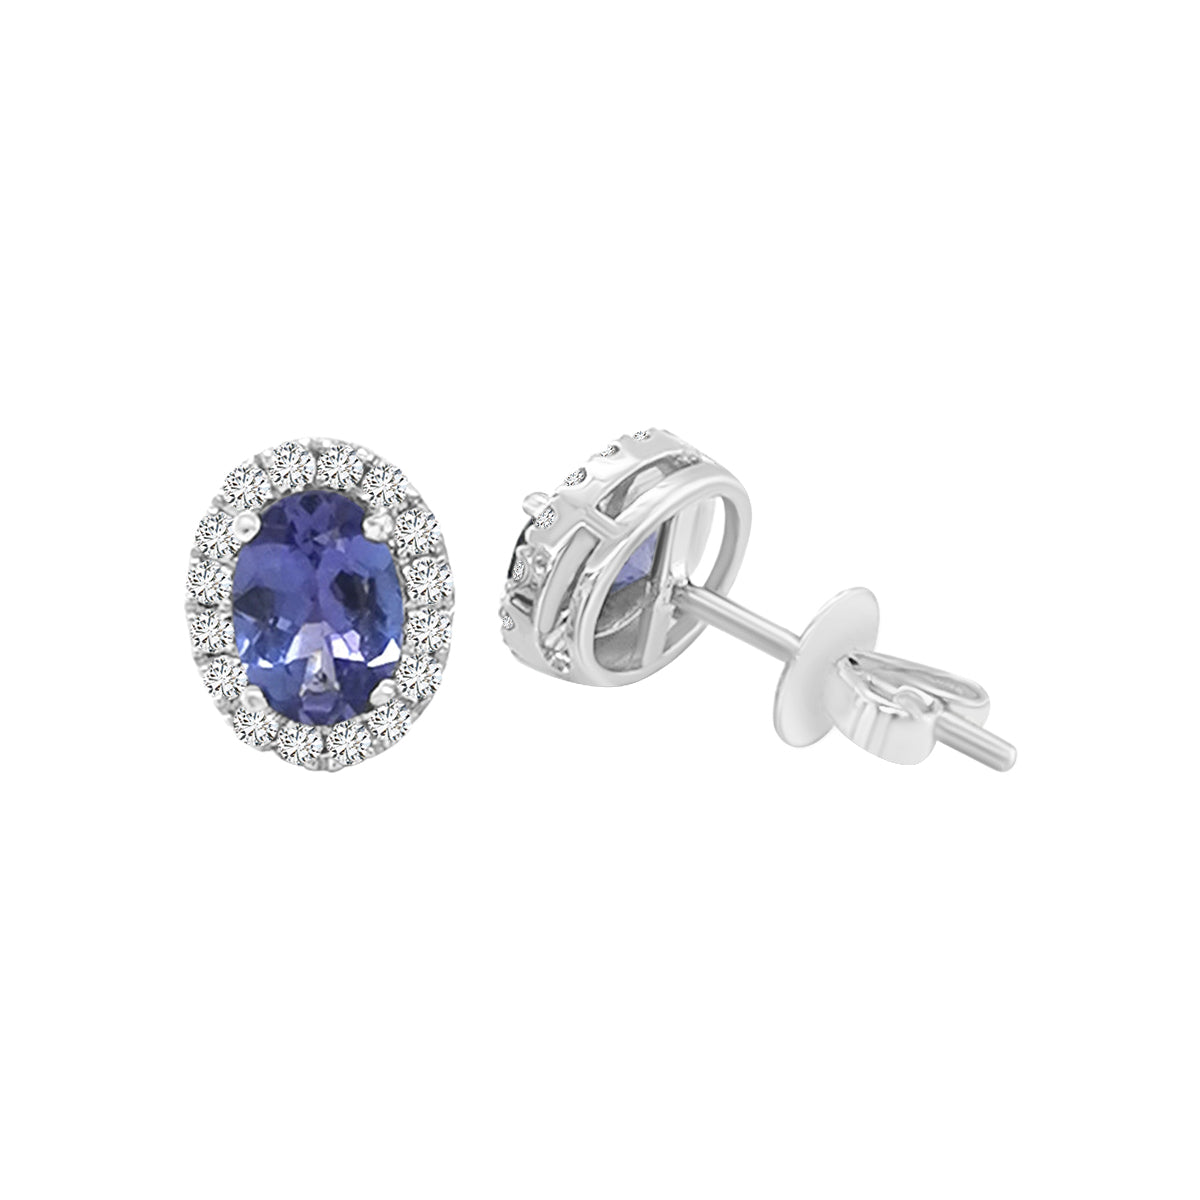 Halo Tanzanite And Diamond Earring In 18k White Gold